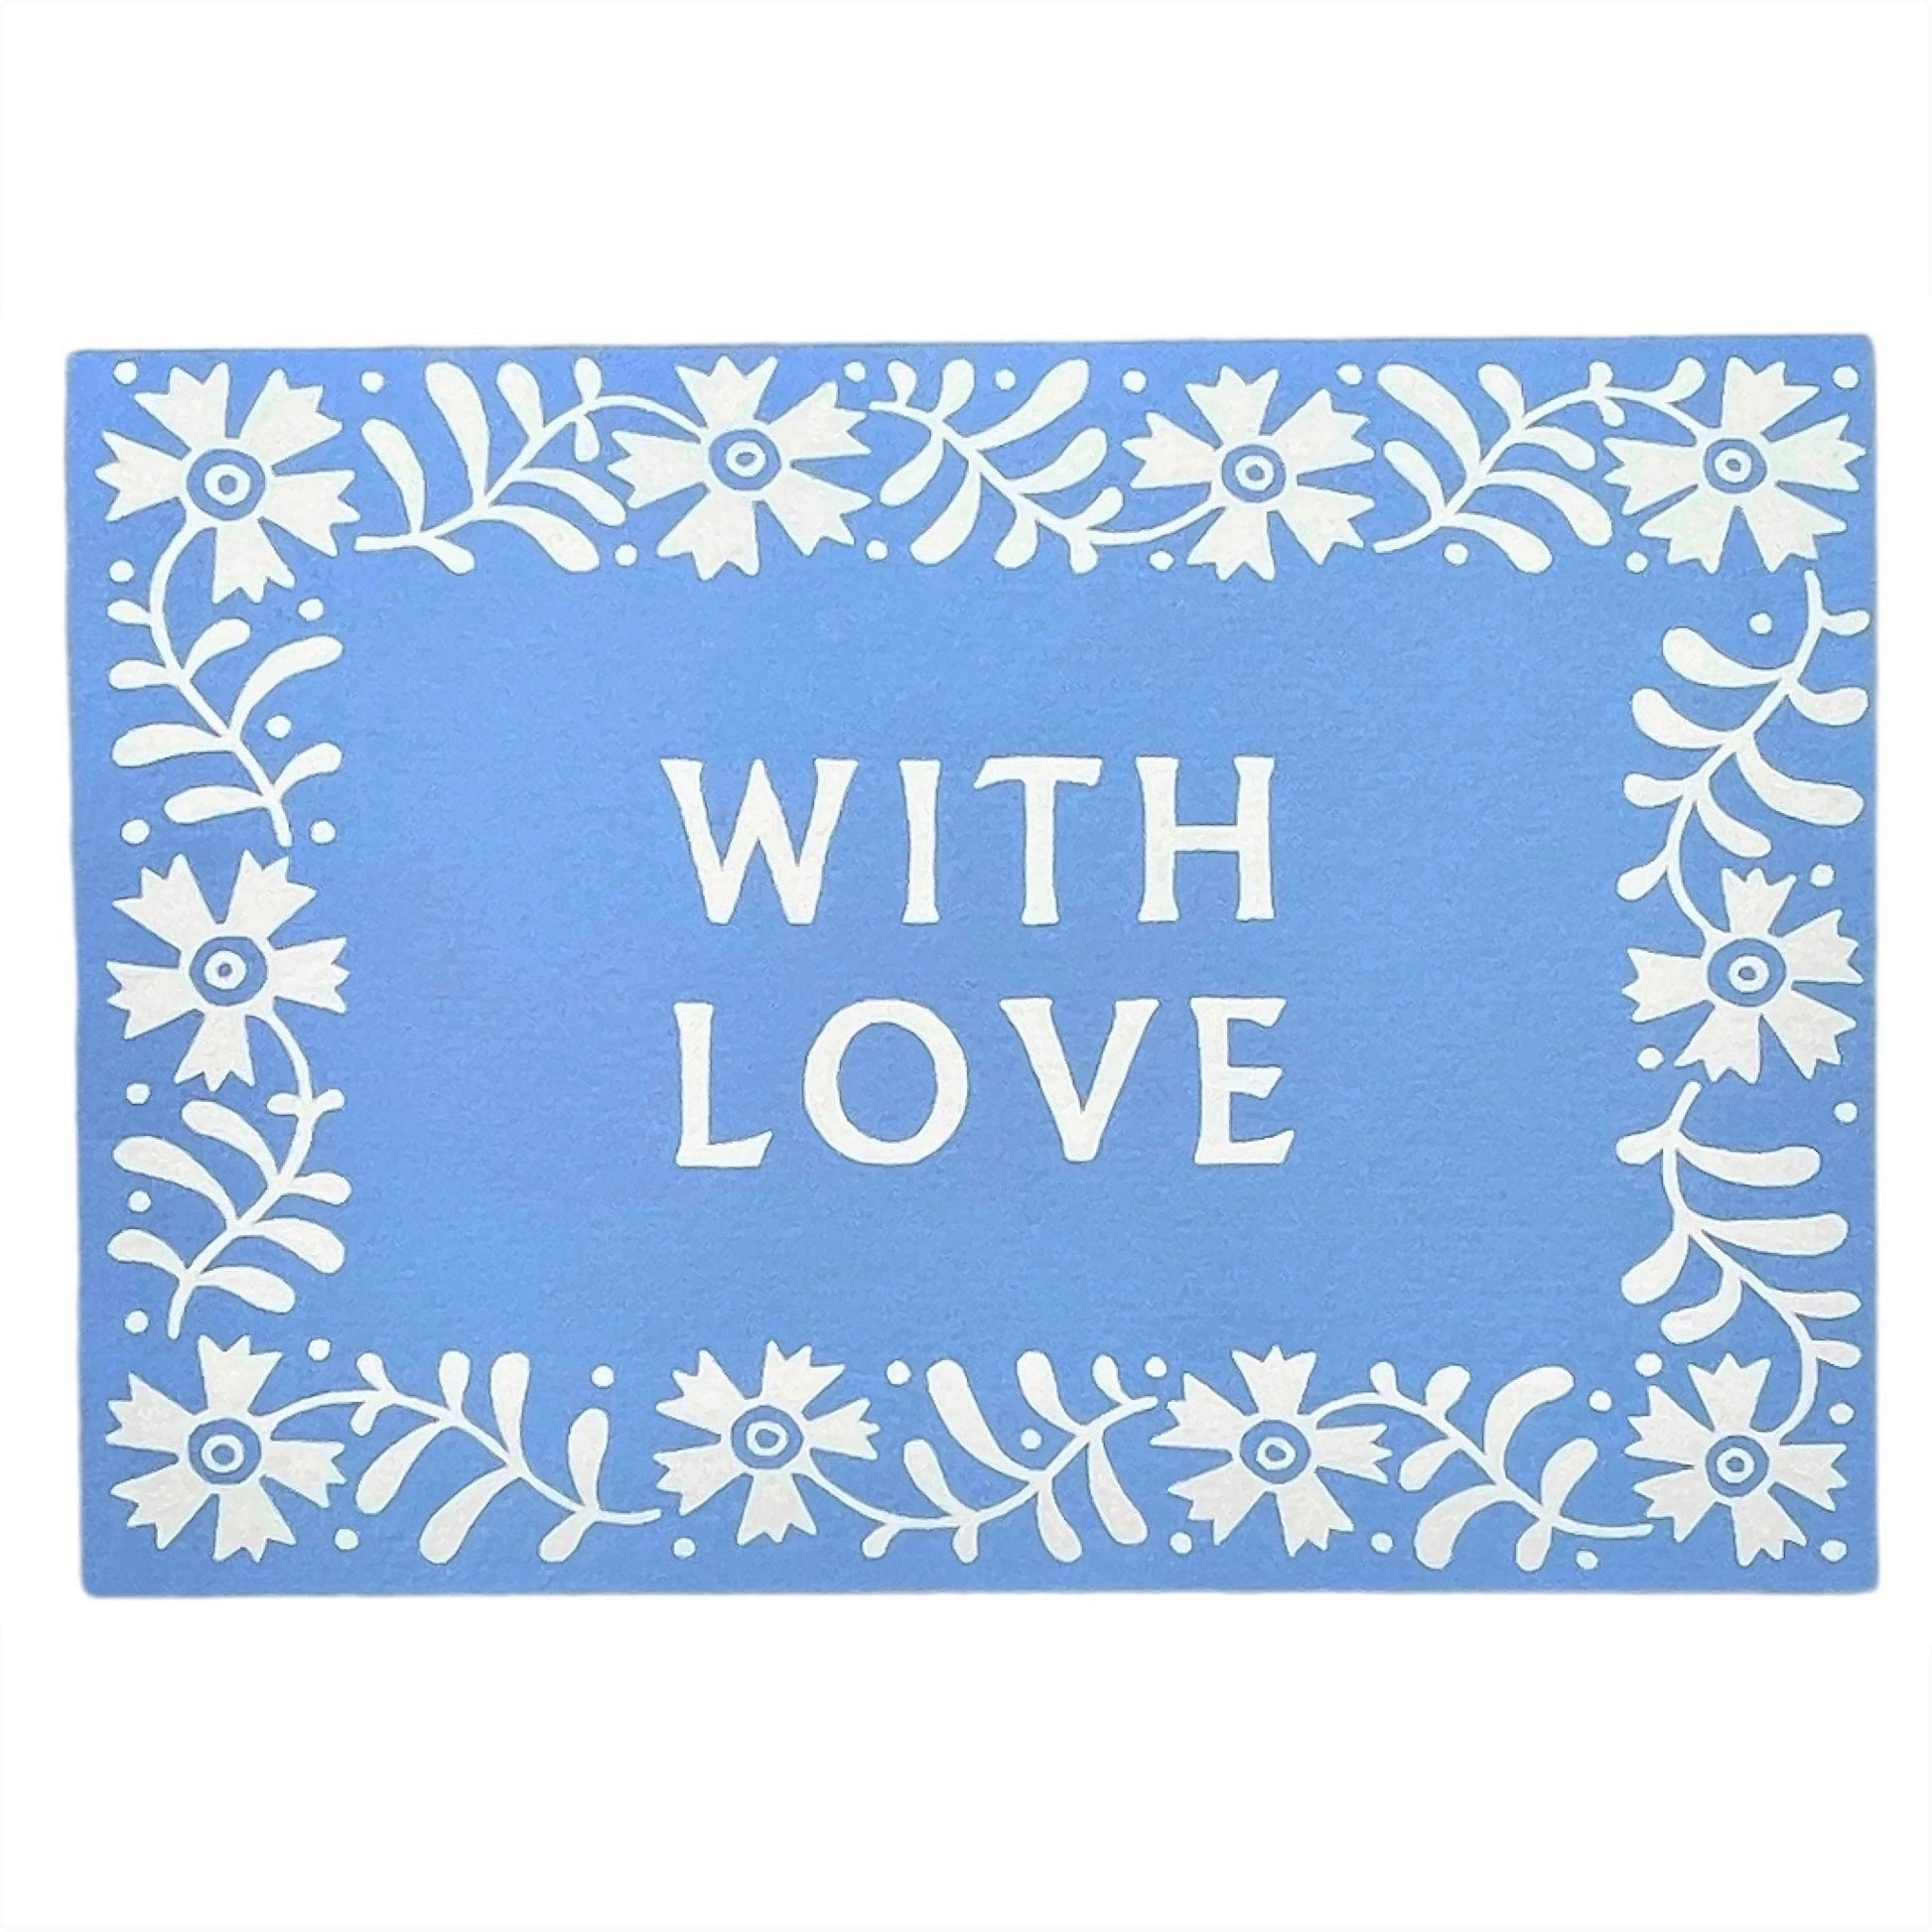 Greetings card with the words WITH LOVE, a white floral border on a blue background. Card by Ariana Martin